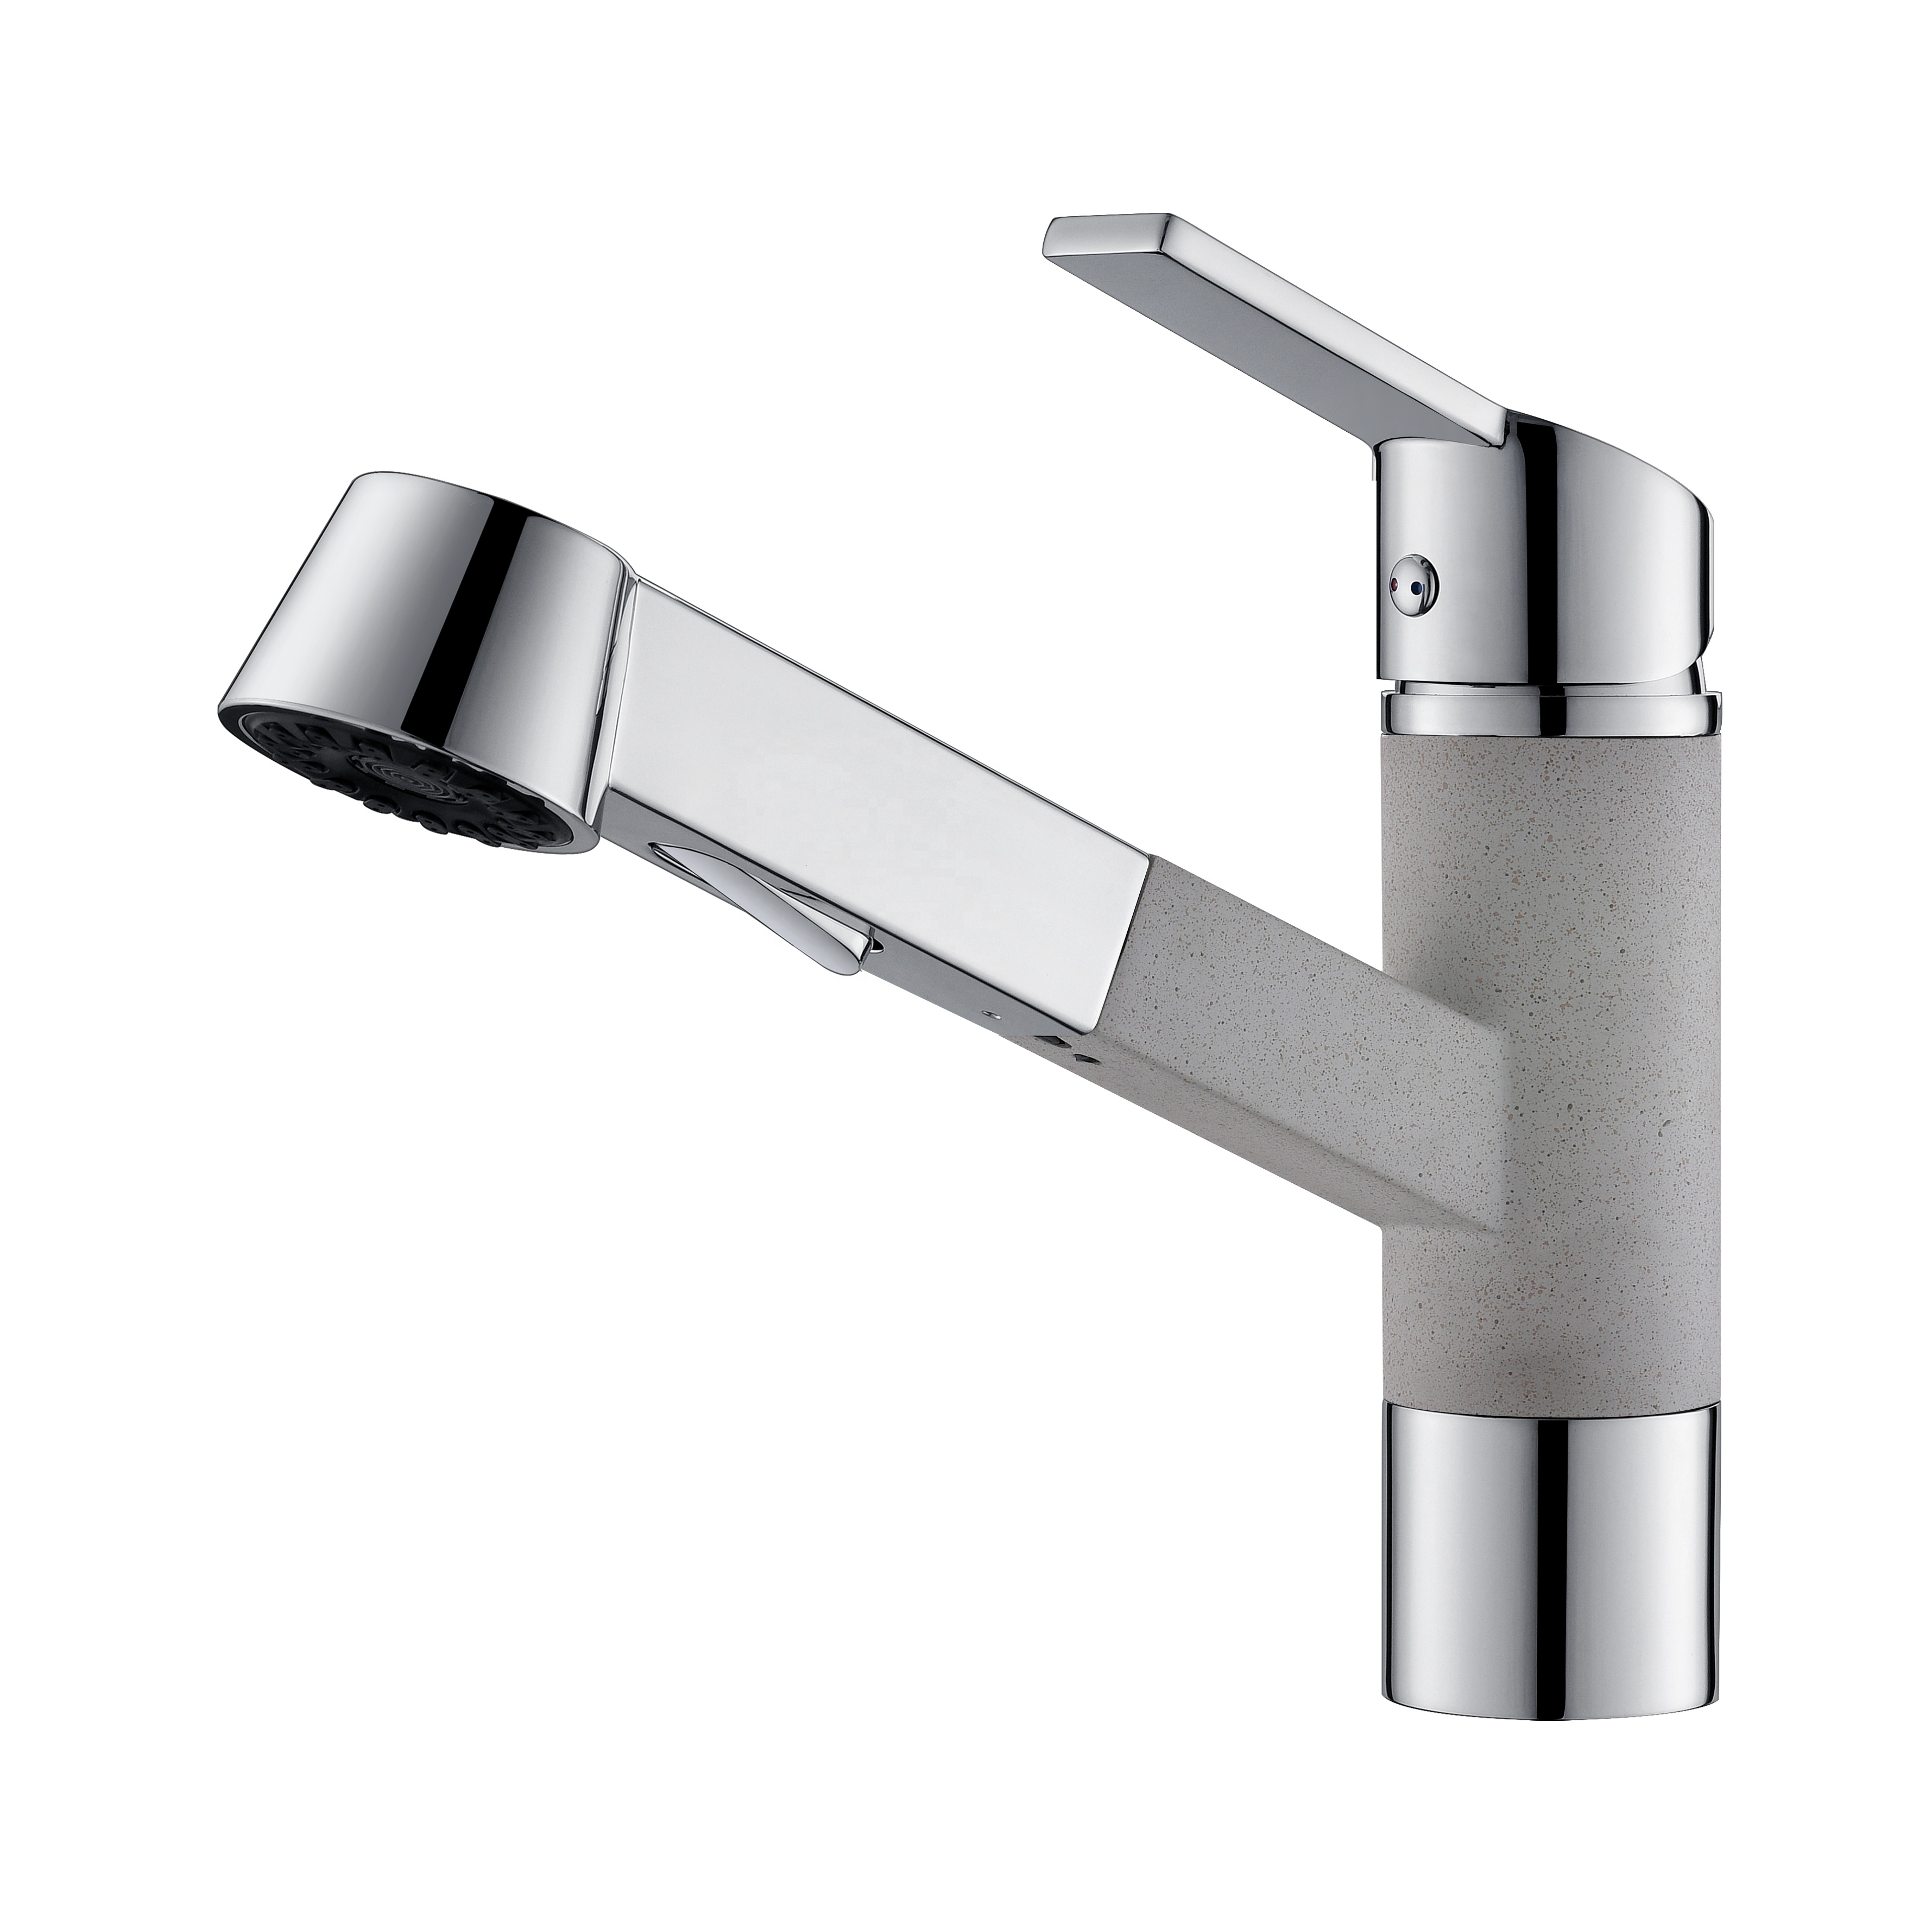 Kaiping Sanitary Faucet Or Sanitary Ware Or Kitchen Sink Faucet Zinc Handle Faucet Modern